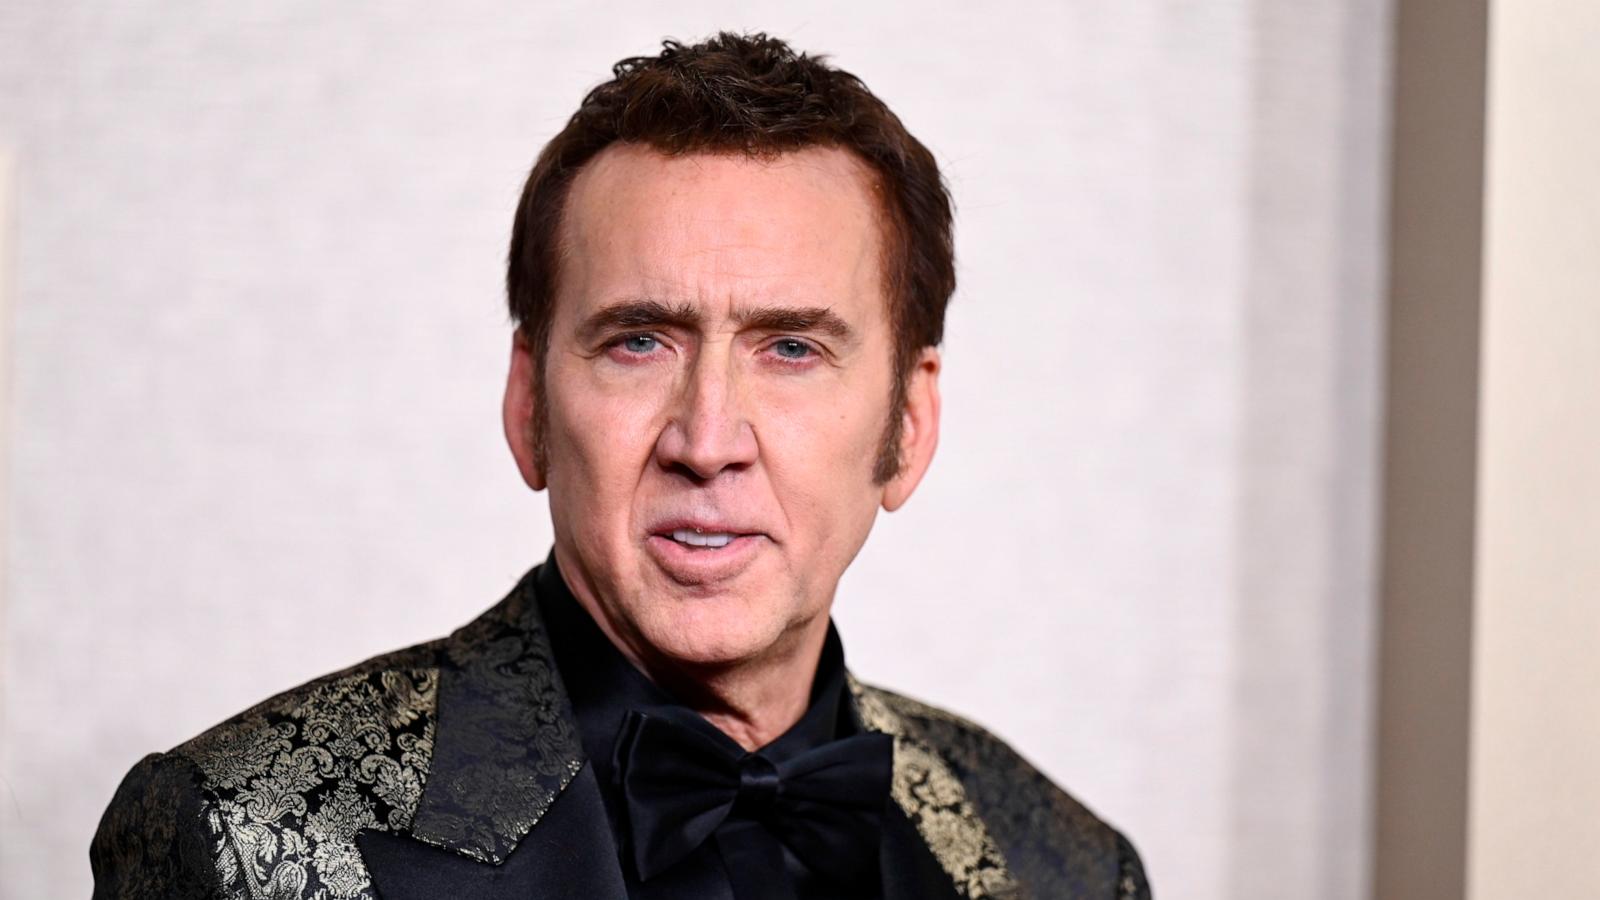 PHOTO: Nicolas Cage at the 81st Golden Globe Awards held at the Beverly Hilton Hotel on Jan. 7, 2024 in Beverly Hills, Calif.